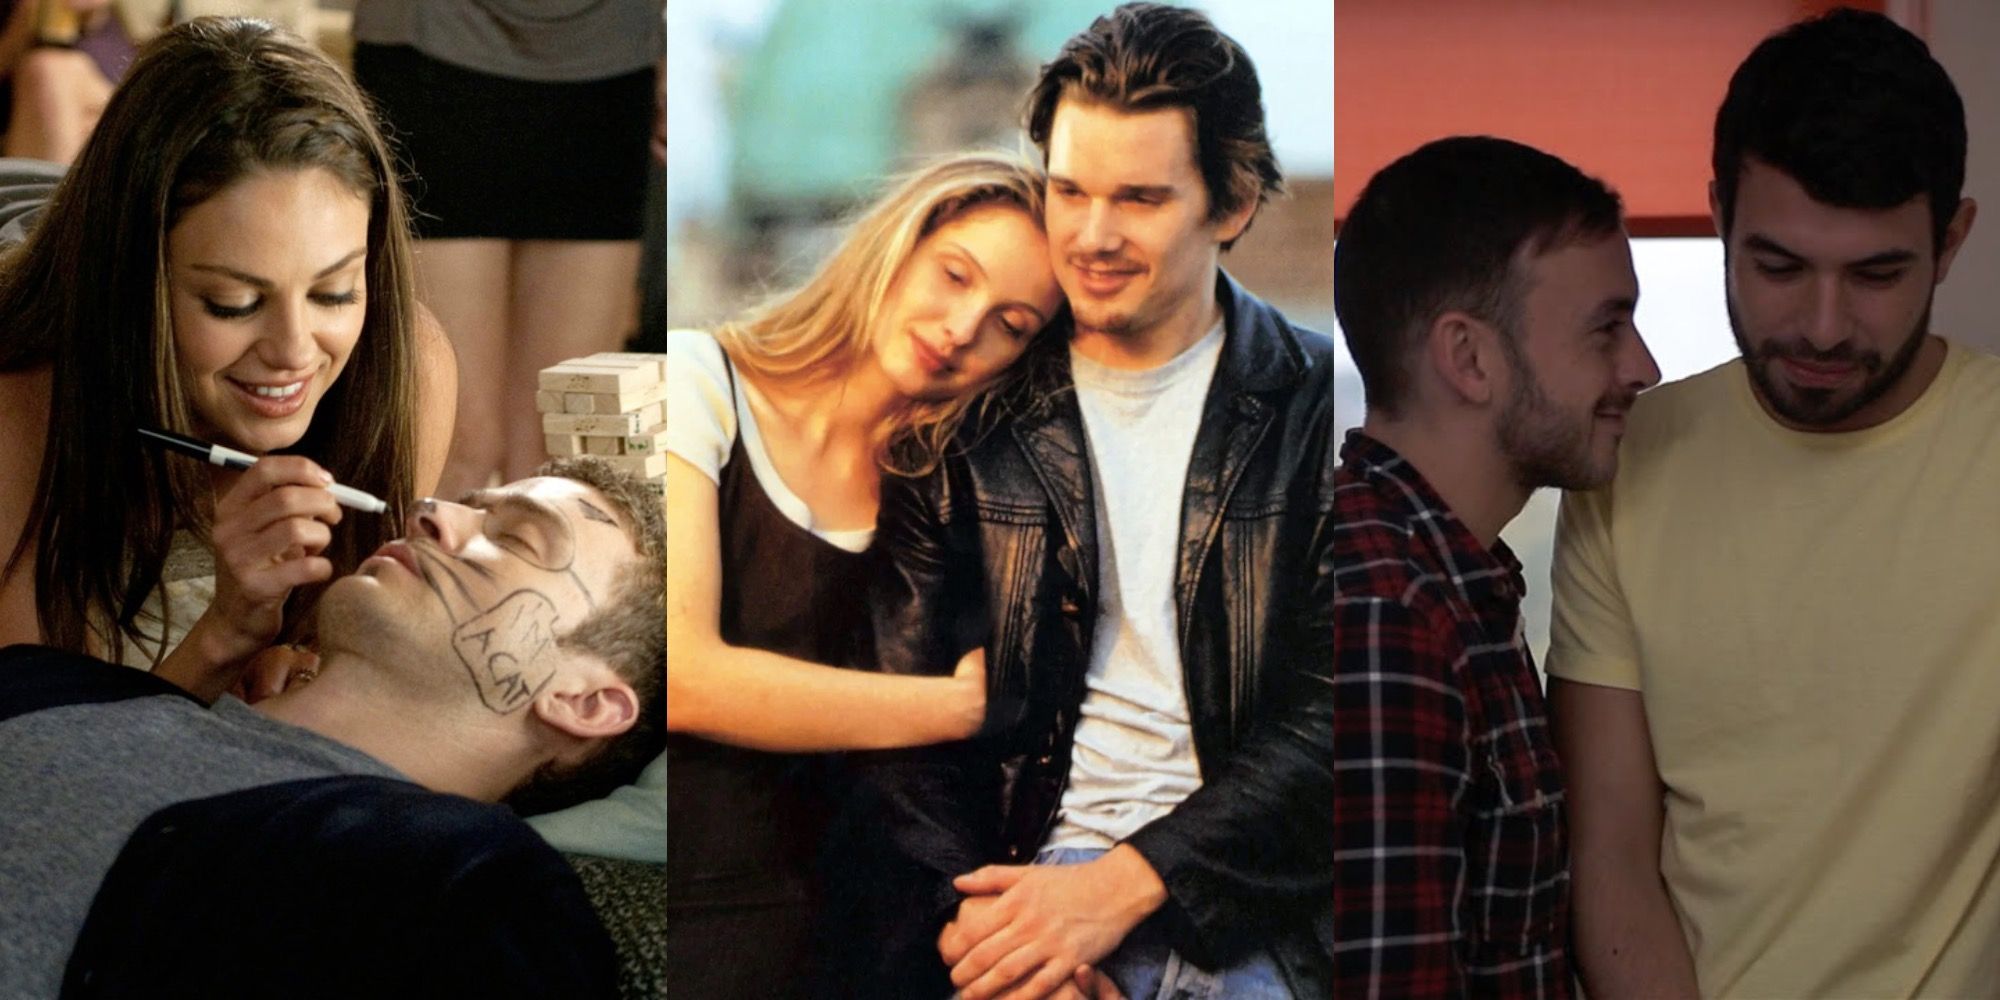 10 Romance Movies Reddit Users Think Best Portray Love and Relationships